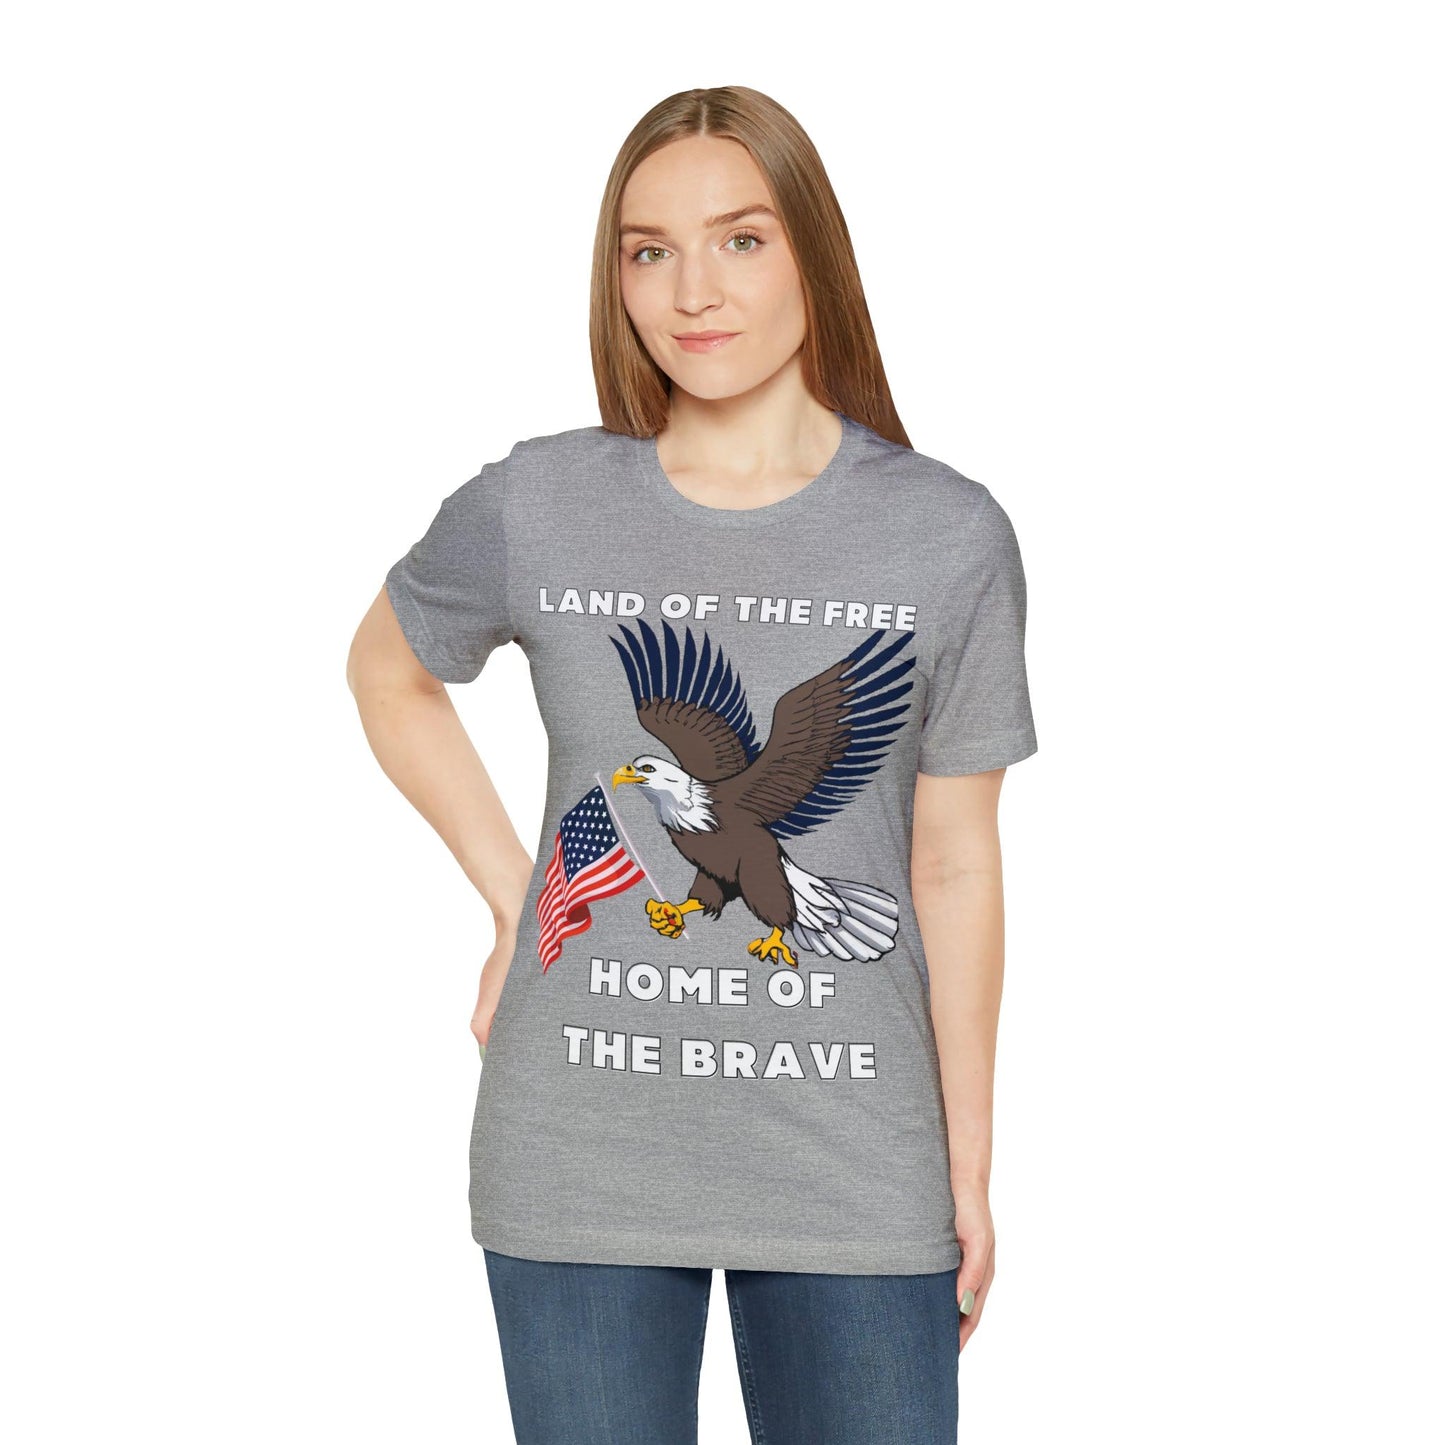 Land of the Free, Home of the Brave: Celebrate Independence Day with Patriotic Shirts - Freedom, Fireworks, and More - Giftsmojo